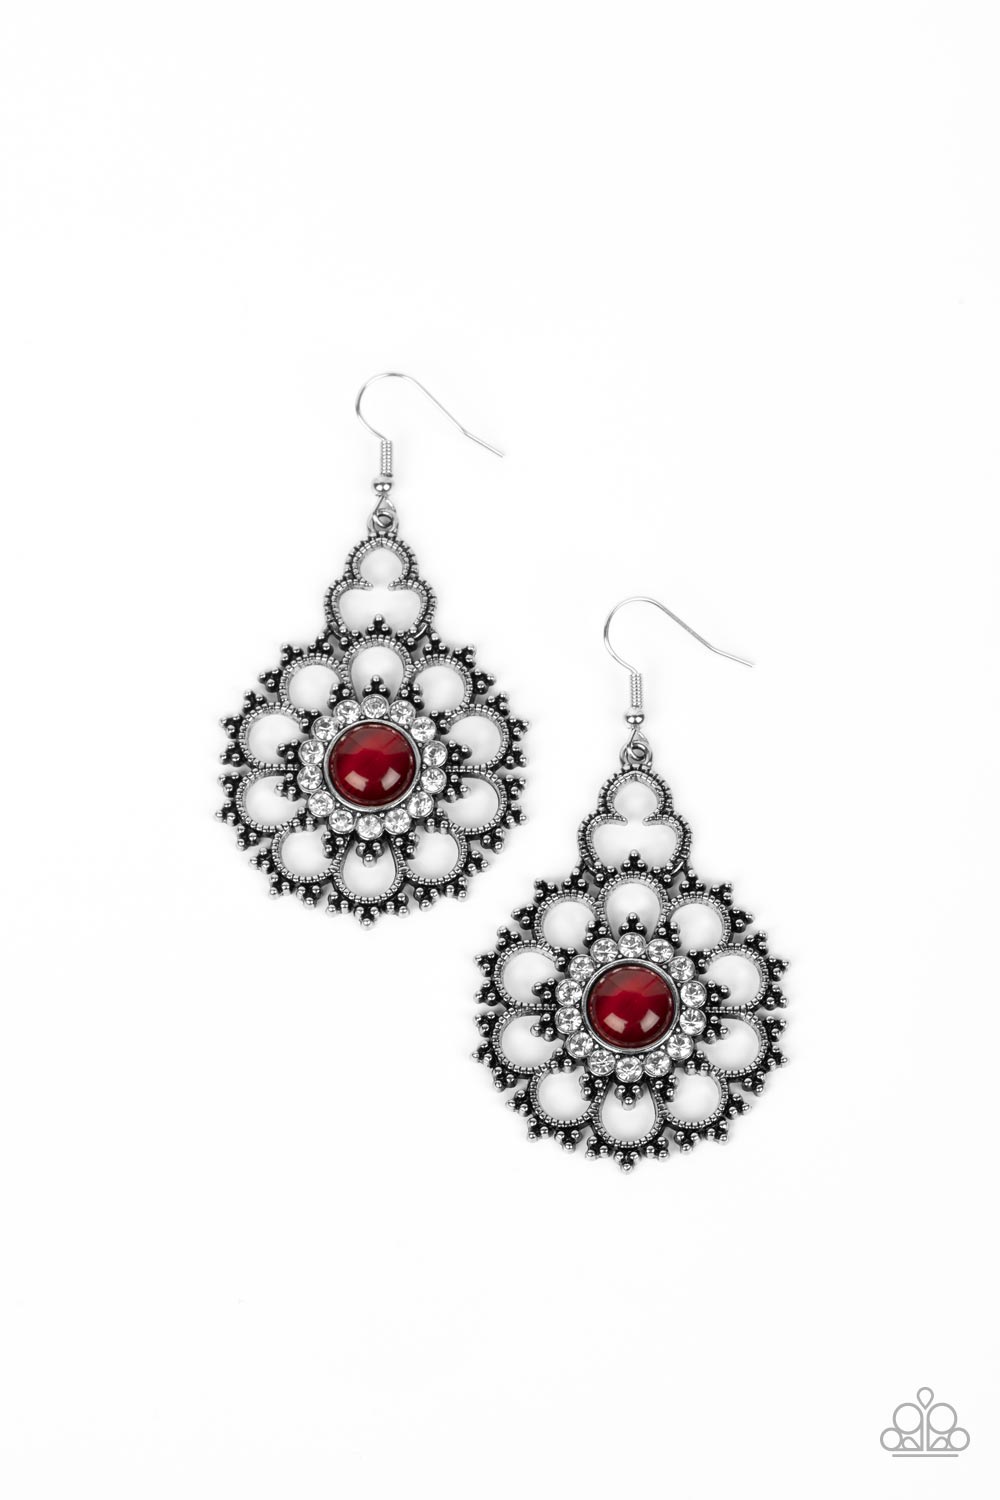 Floral Renaissance Red Cat's Eye Stone Earrings - Paparazzi Accessories- lightbox - CarasShop.com - $5 Jewelry by Cara Jewels